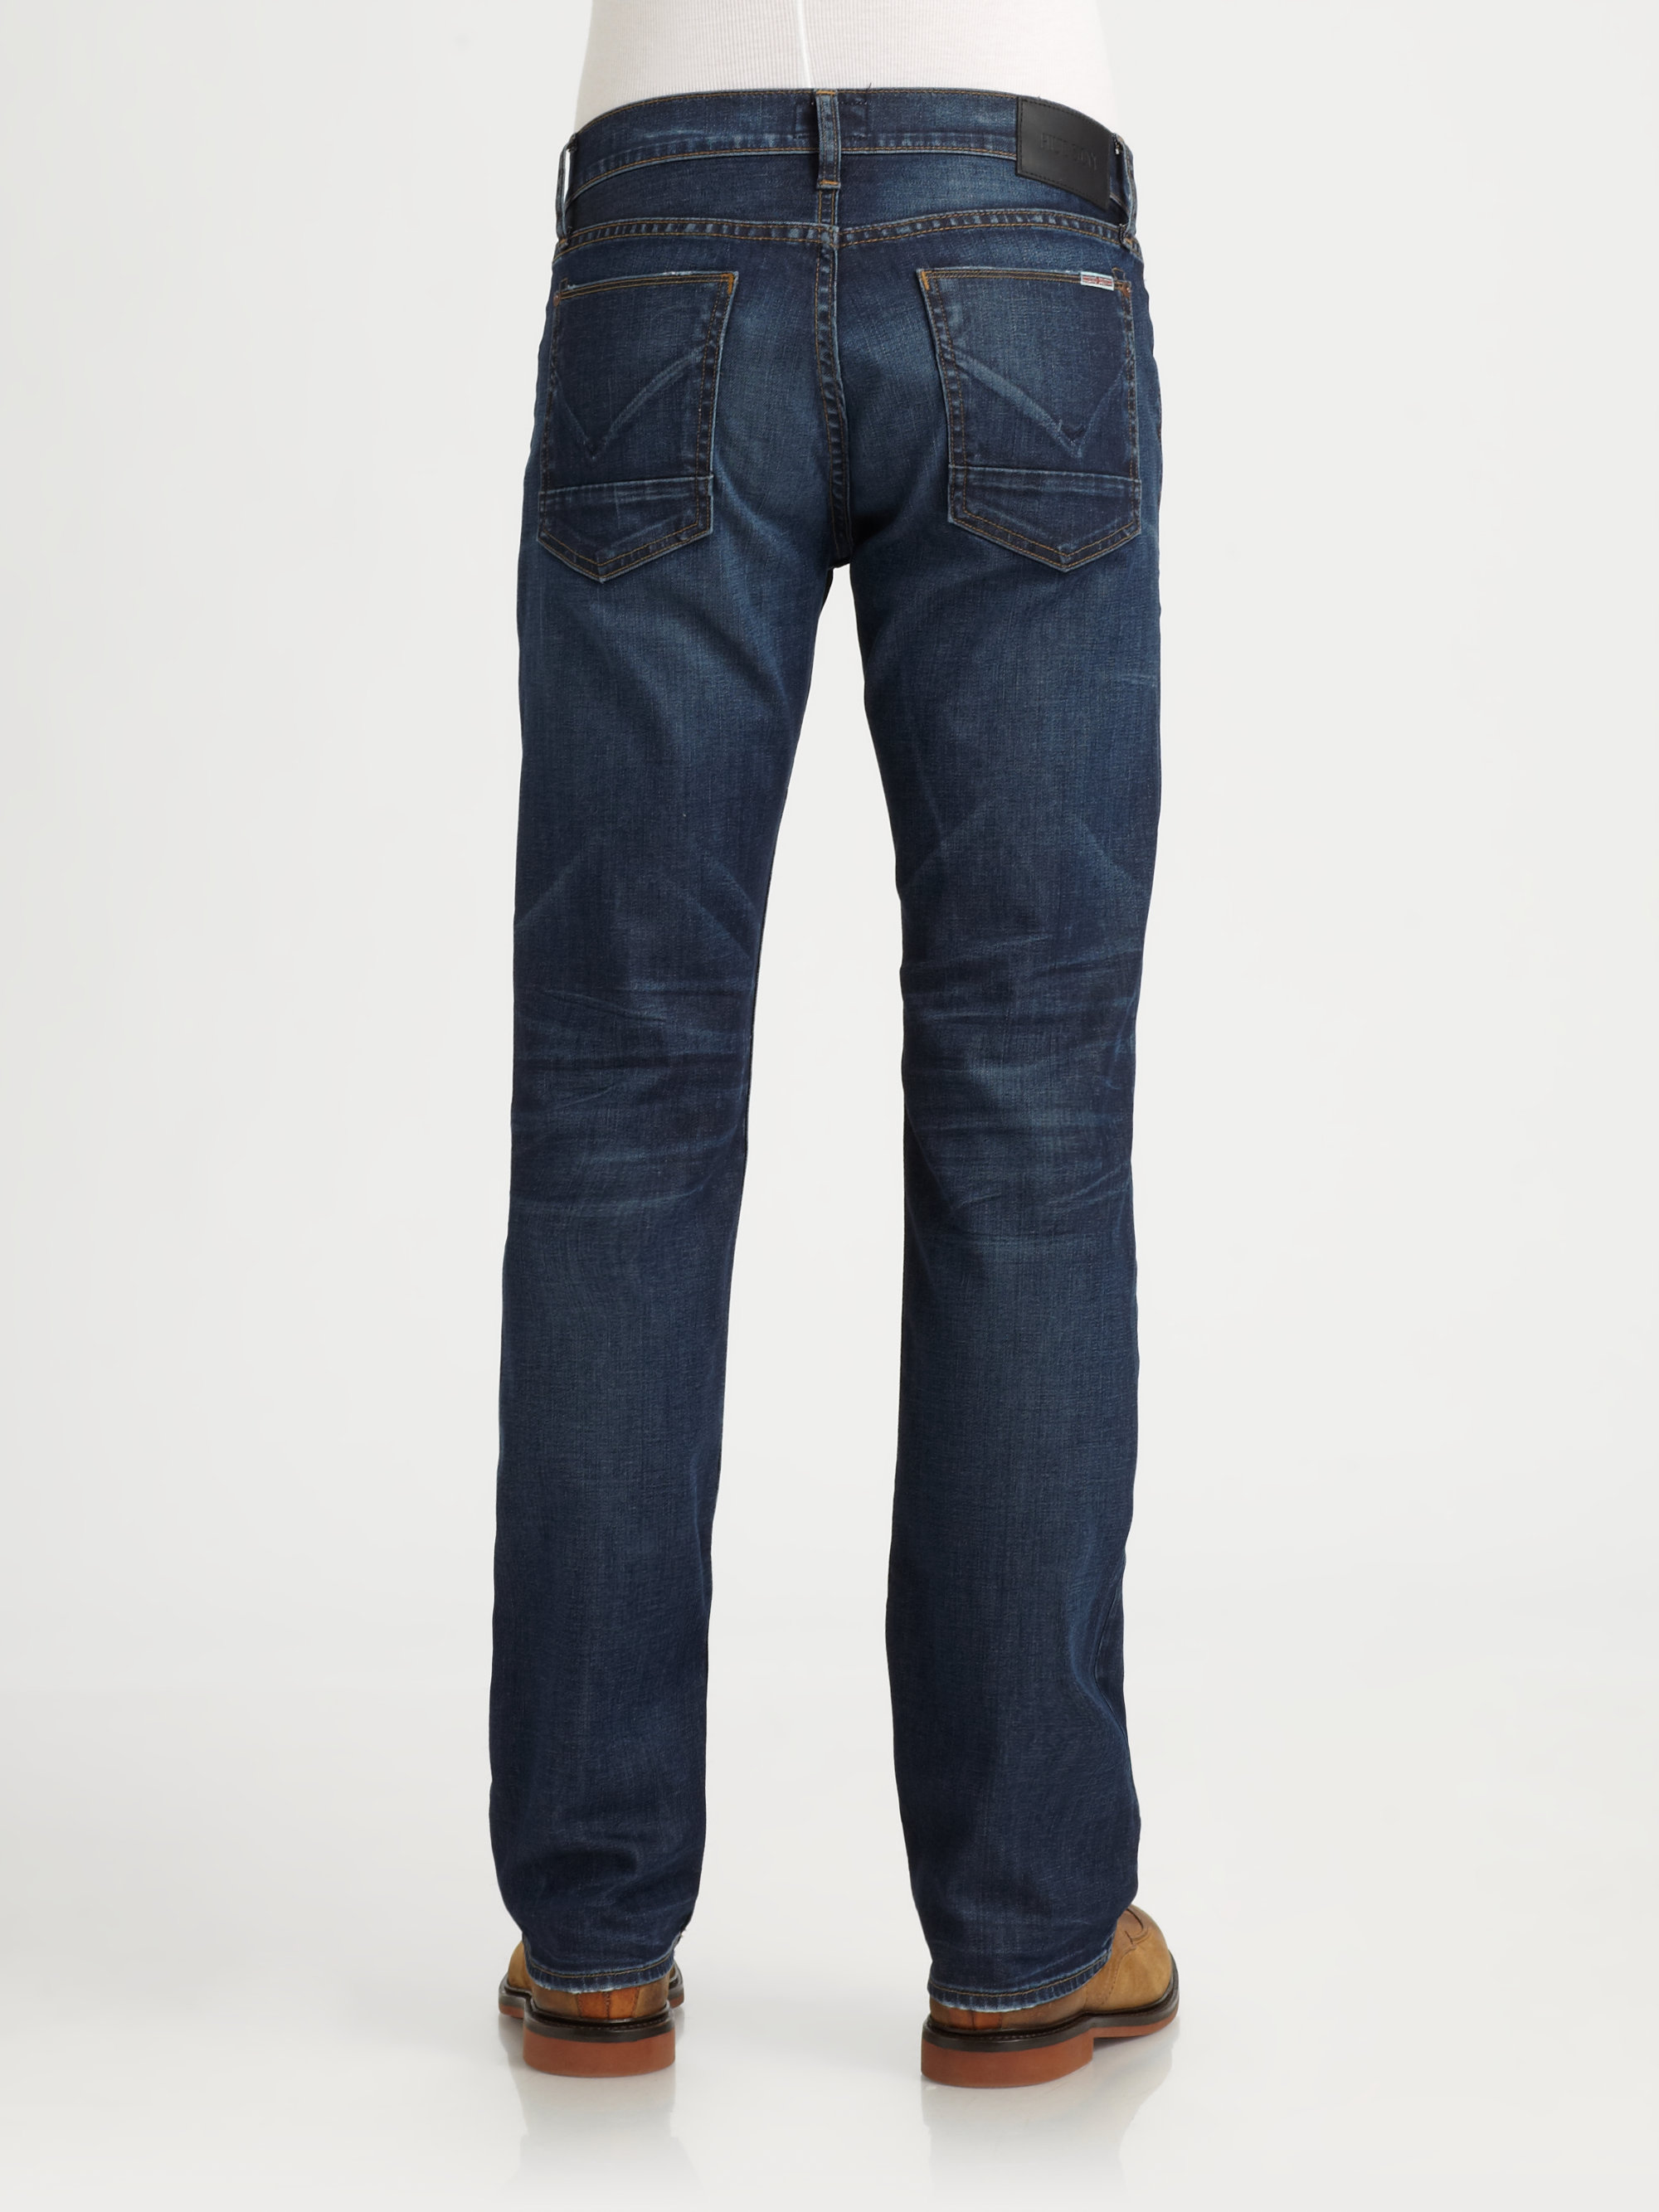 Lyst - Hudson Jeans Beau Micro Bootcut Jeans in Blue for Men